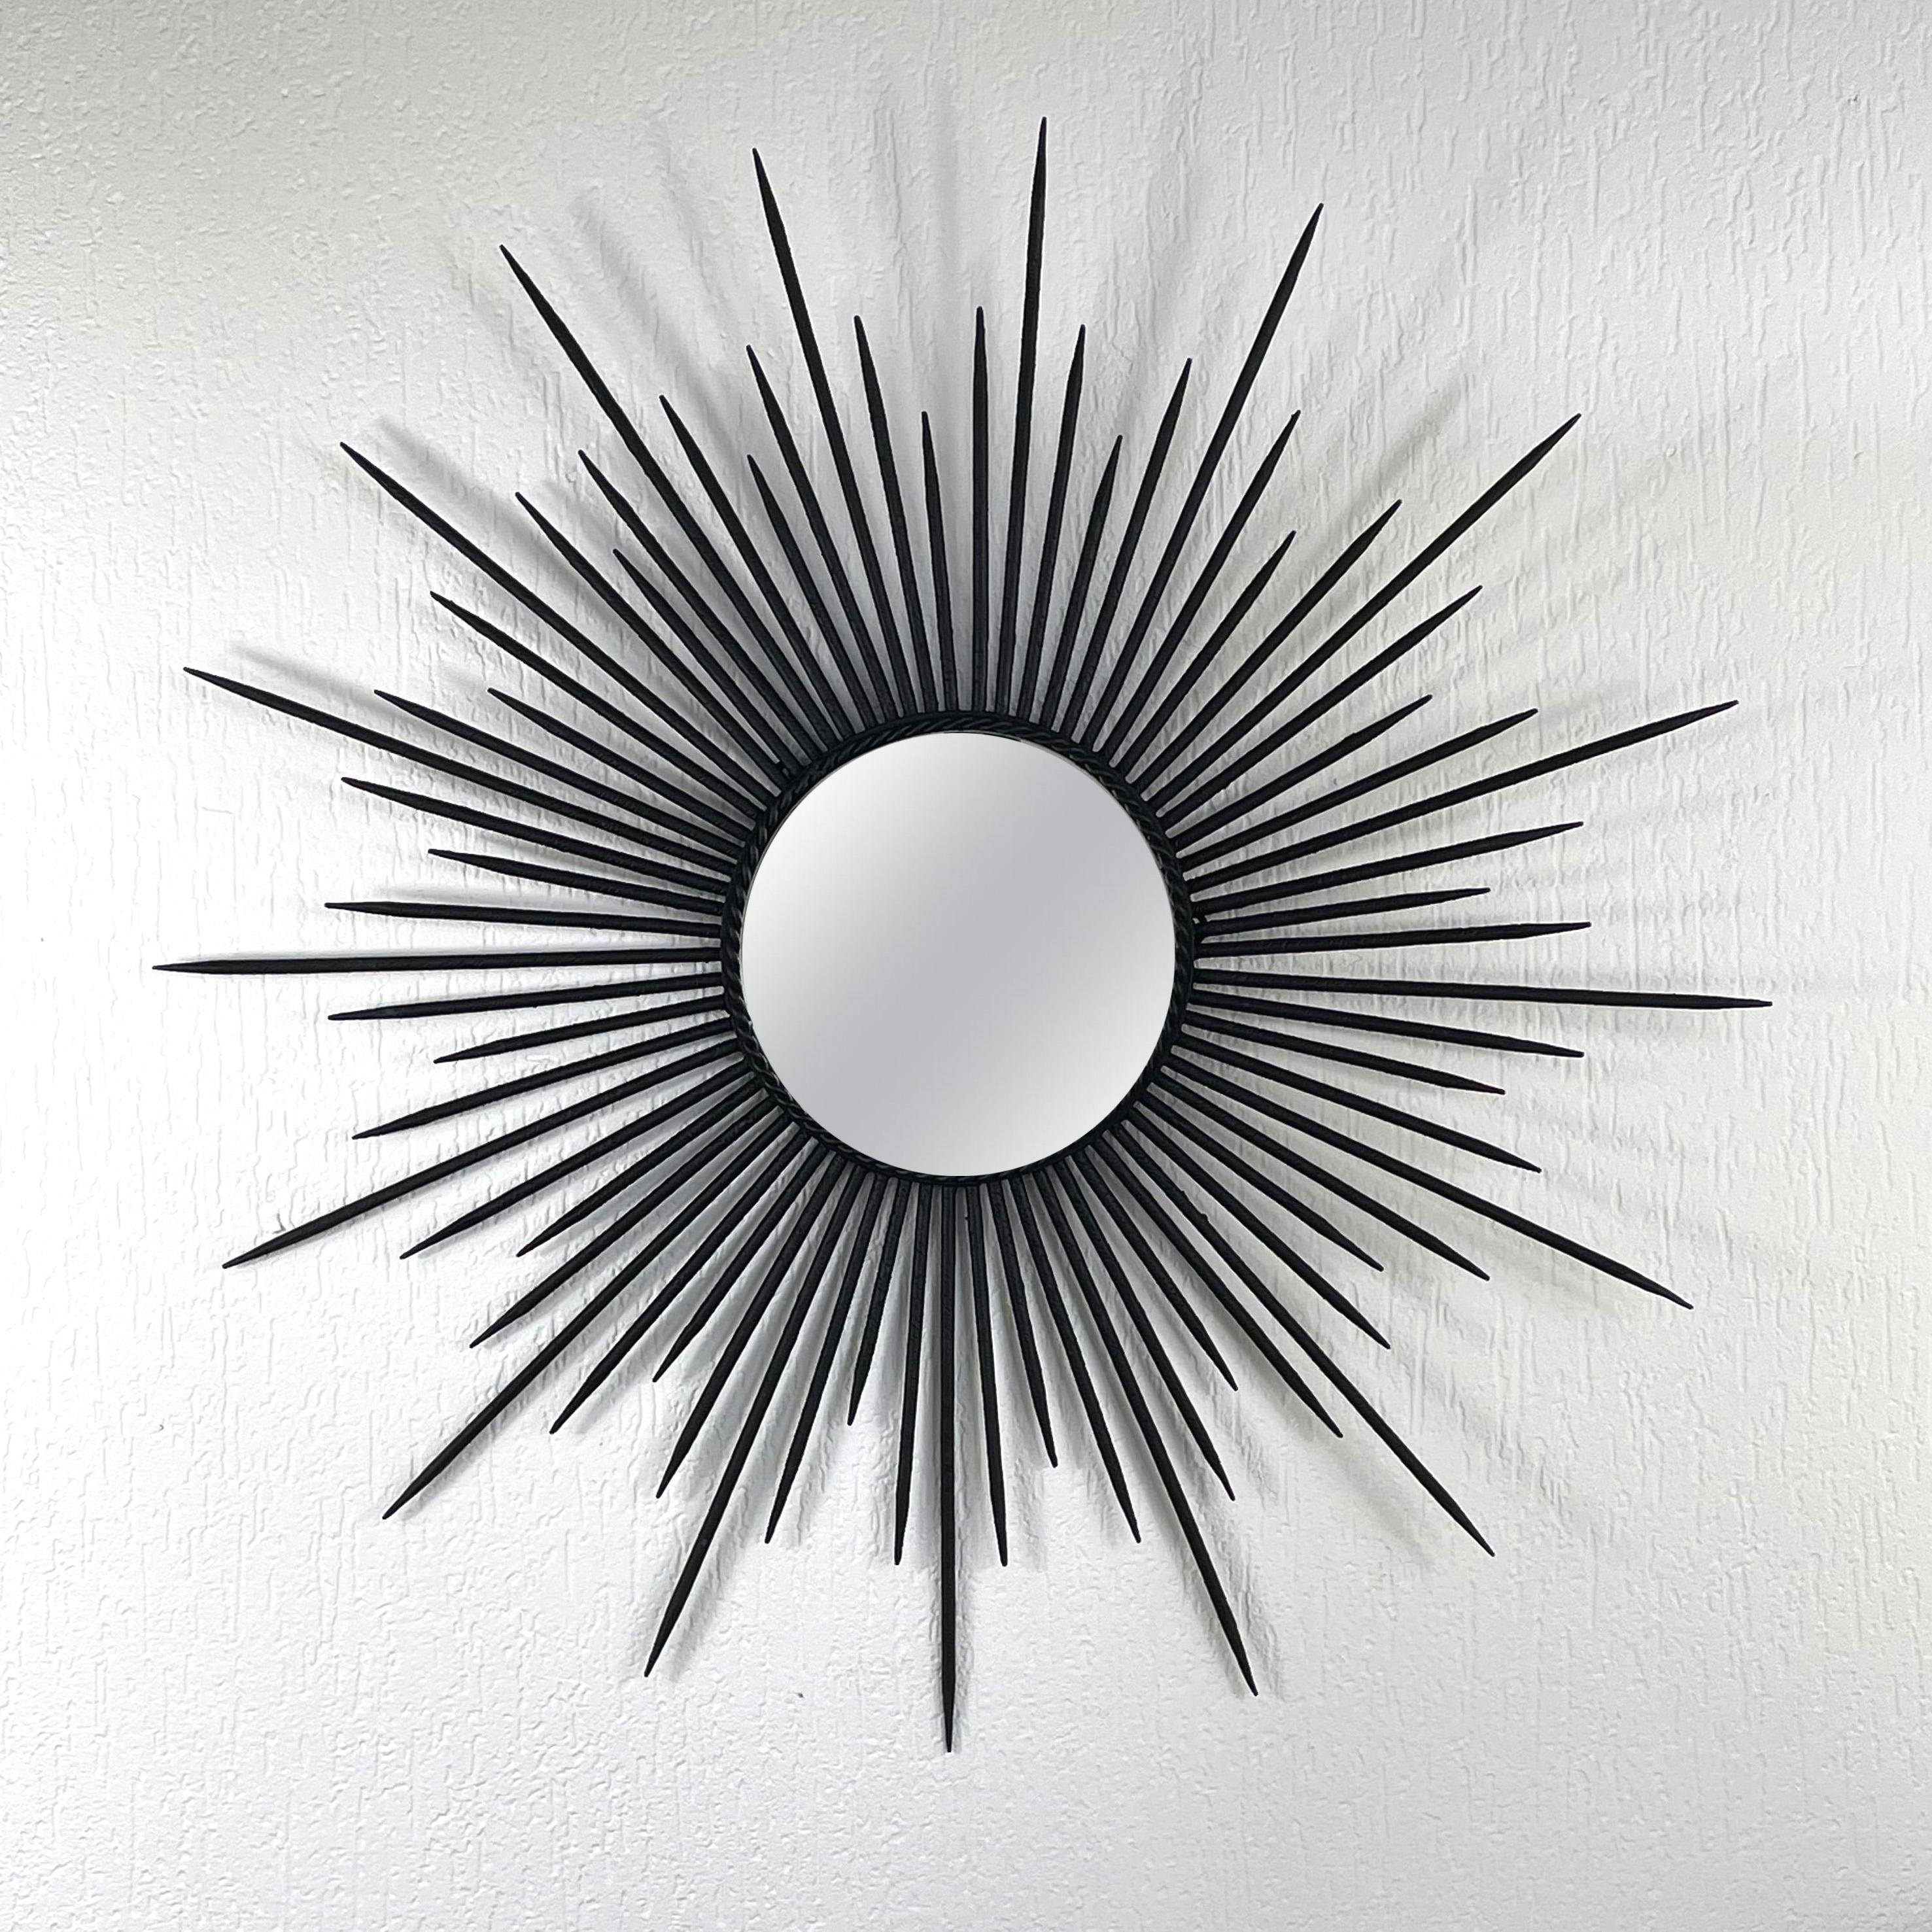 This unusual midcentury brutalist sunburst wall mirror was designed and manufactured in France in the 1950s. It features a blackened wrought iron frame and mirror glass.

Total diameter is 29.2